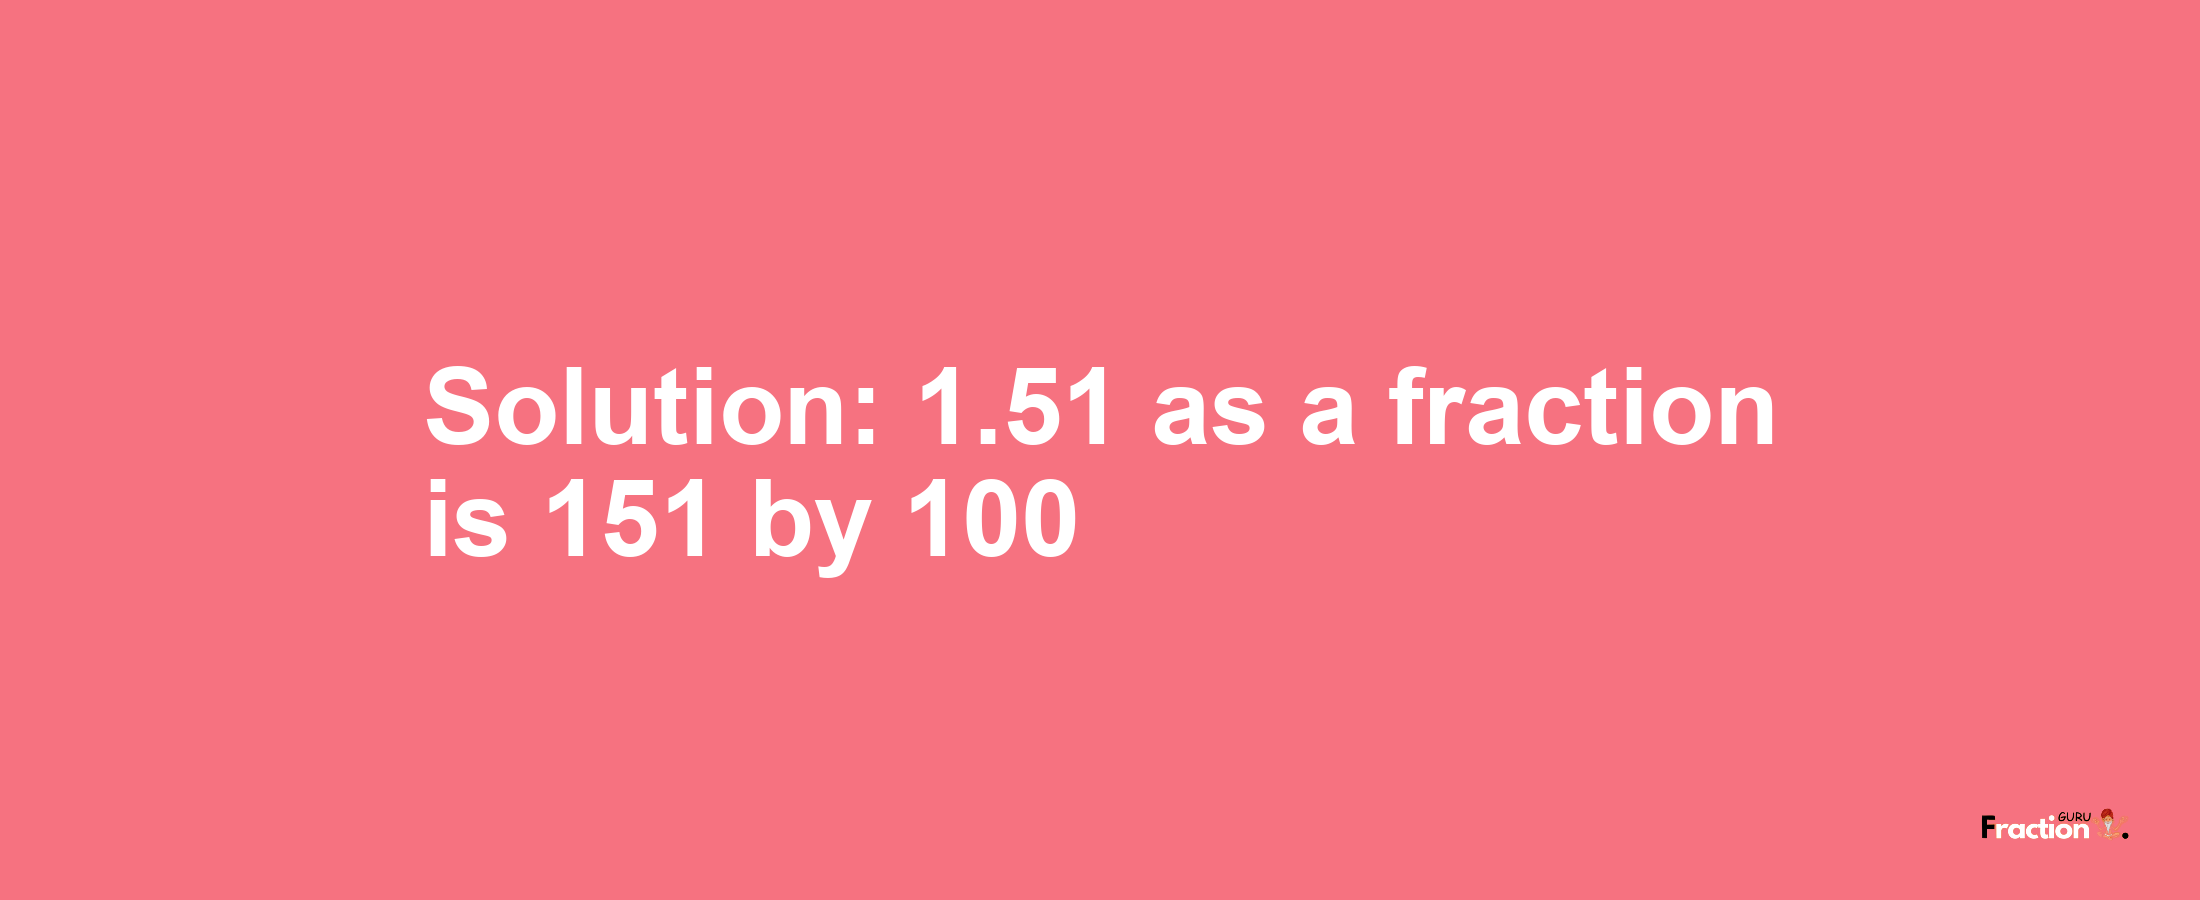 Solution:1.51 as a fraction is 151/100